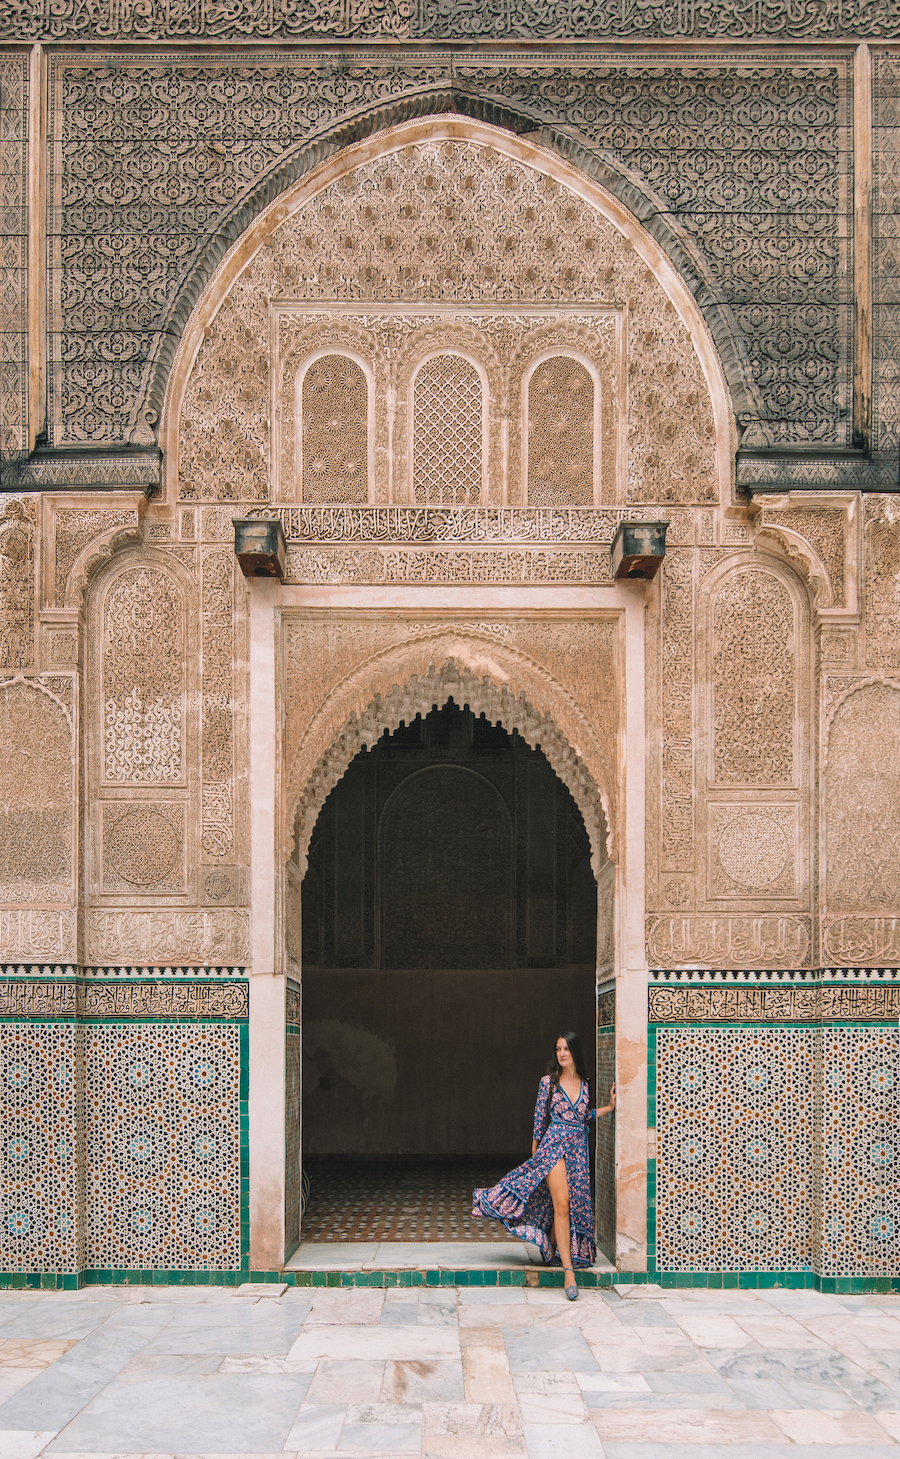 A week in Morocco